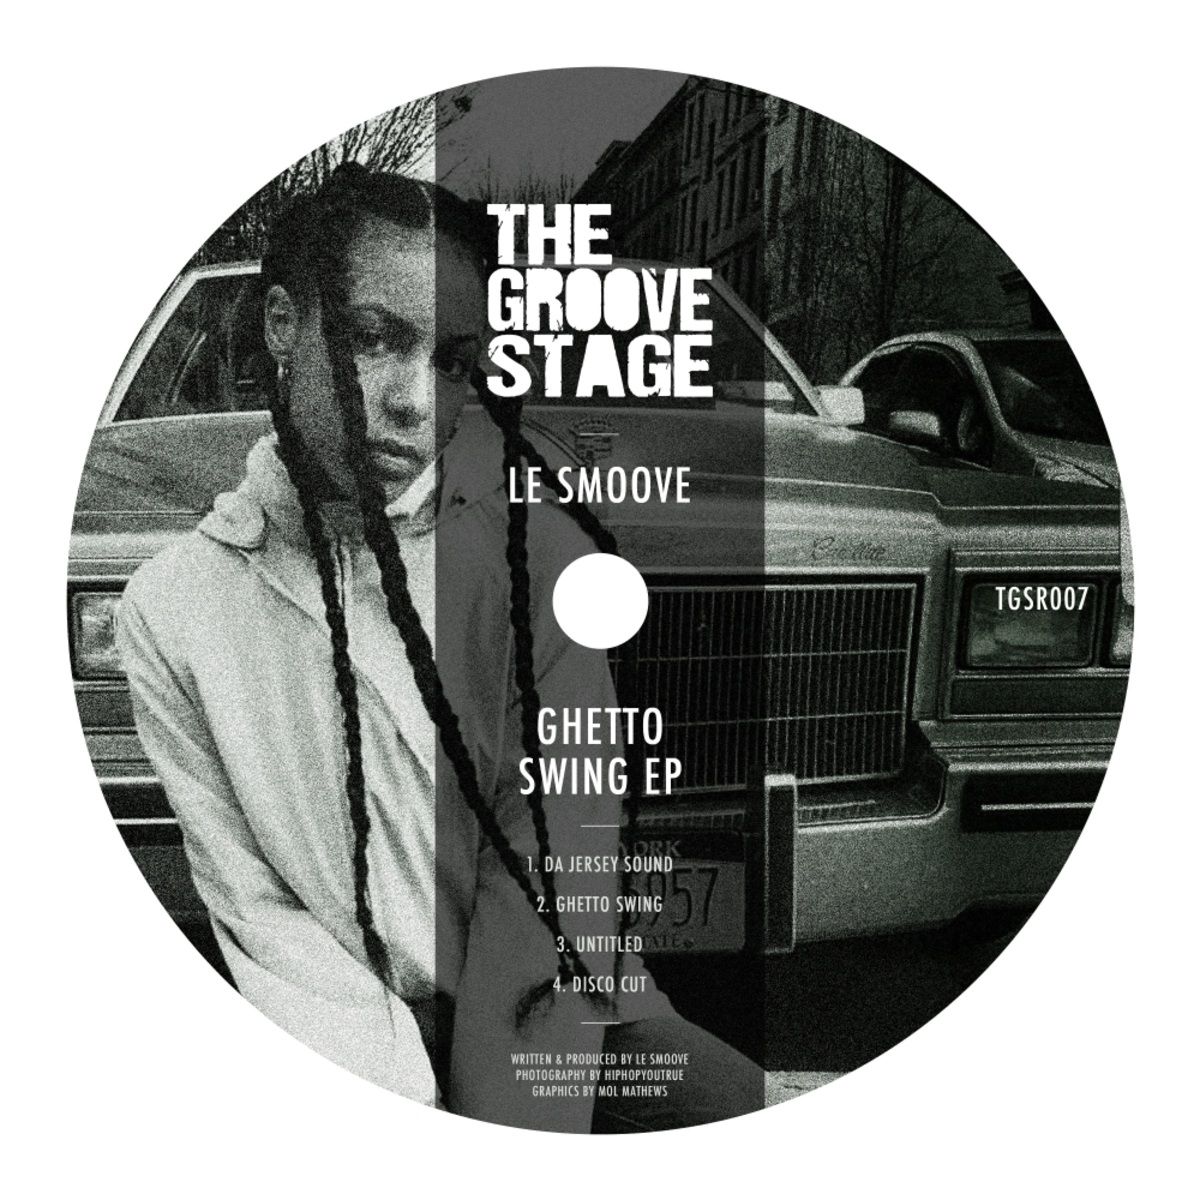 Le Smoove - Ghetto Swing EP / The Groove Stage